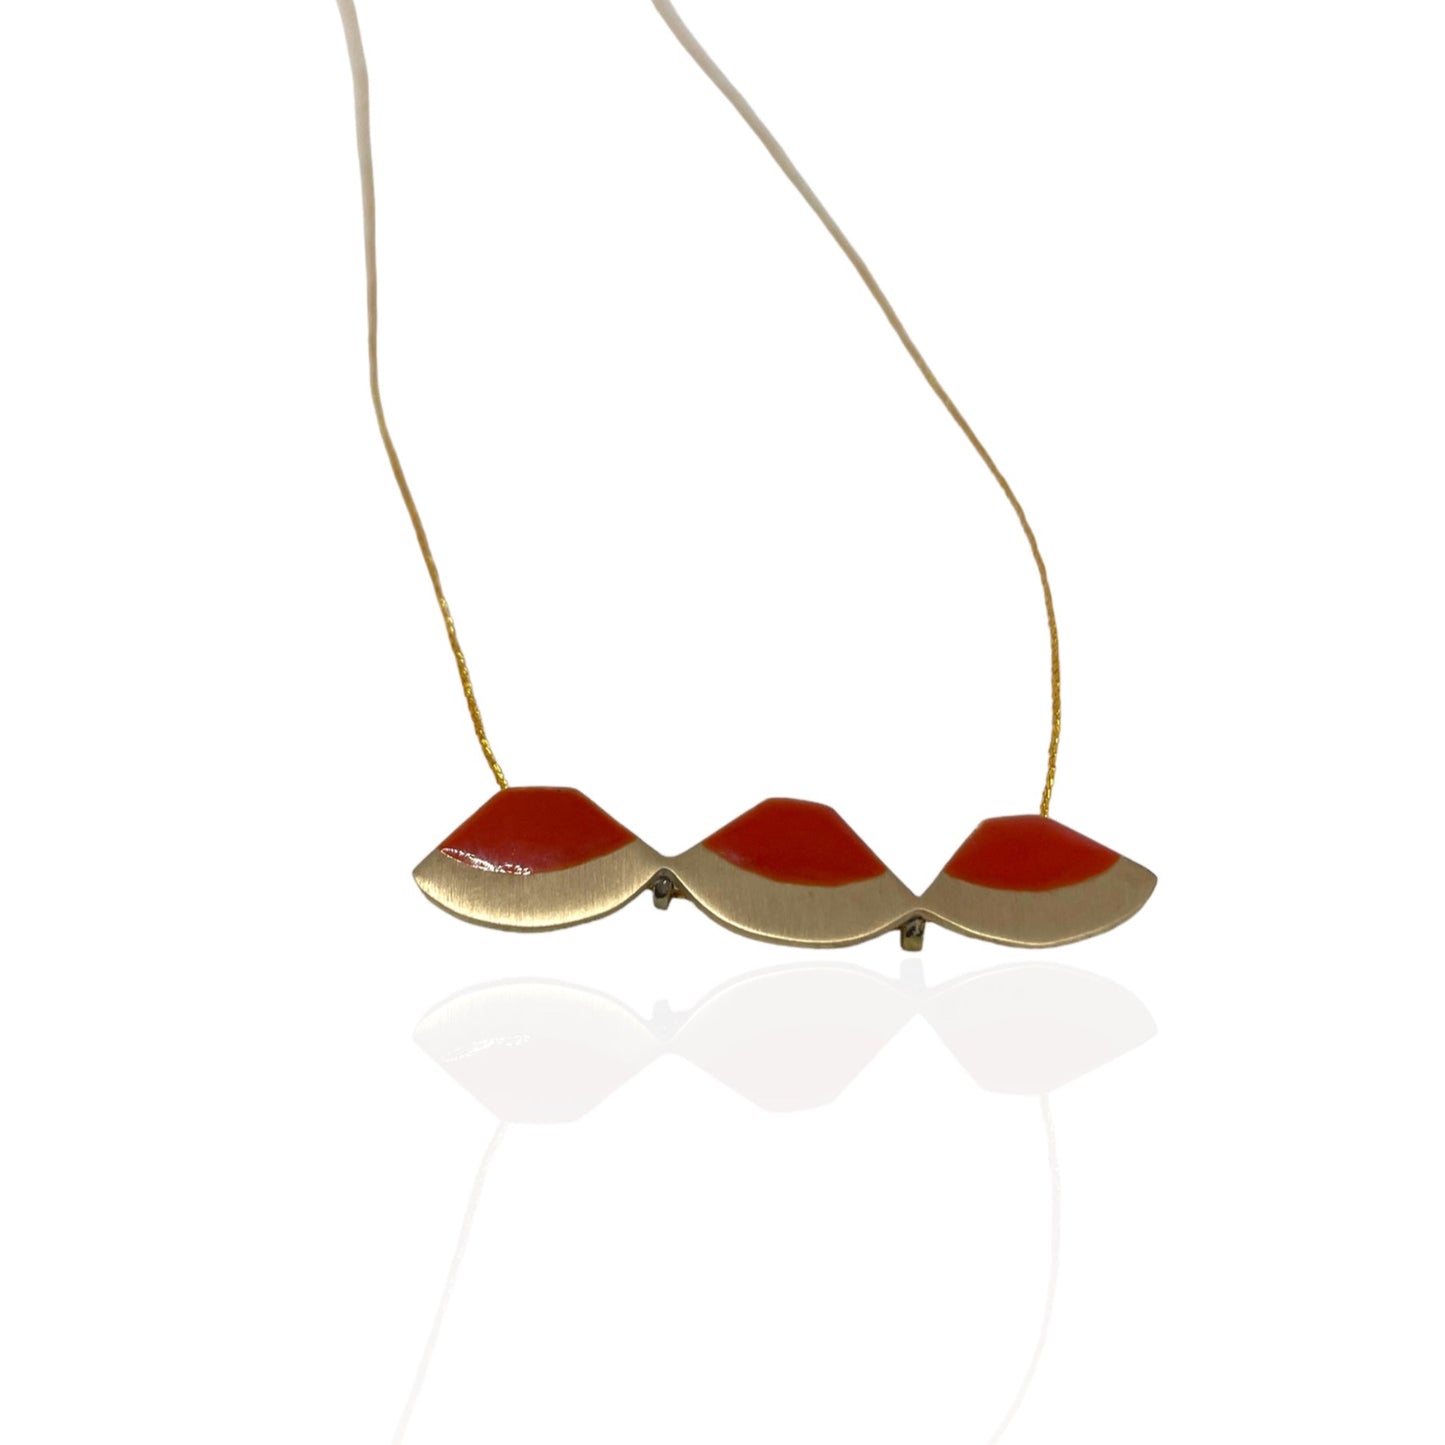 Brass necklace with resin | Ventalia Necklace